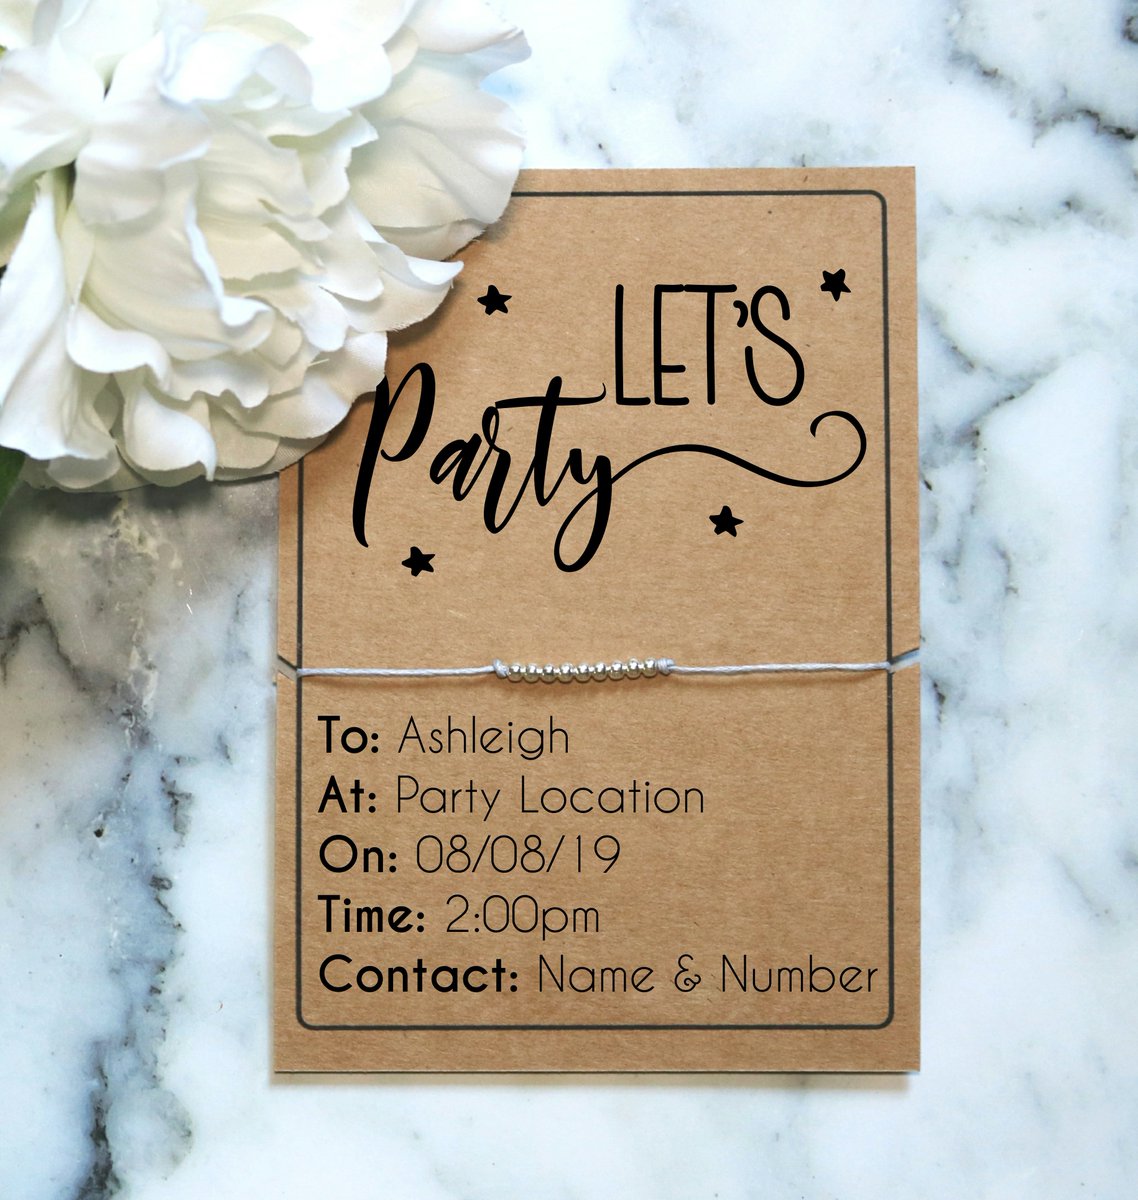 Looking for something a little different? bit.ly/2TS3ioM 🐖 #WednesdayWisdom #party #partytime #partygirl #wishbracelet #partyinvitation #HumpDayHappiness #Wednesday #girls #partyideas #blogger